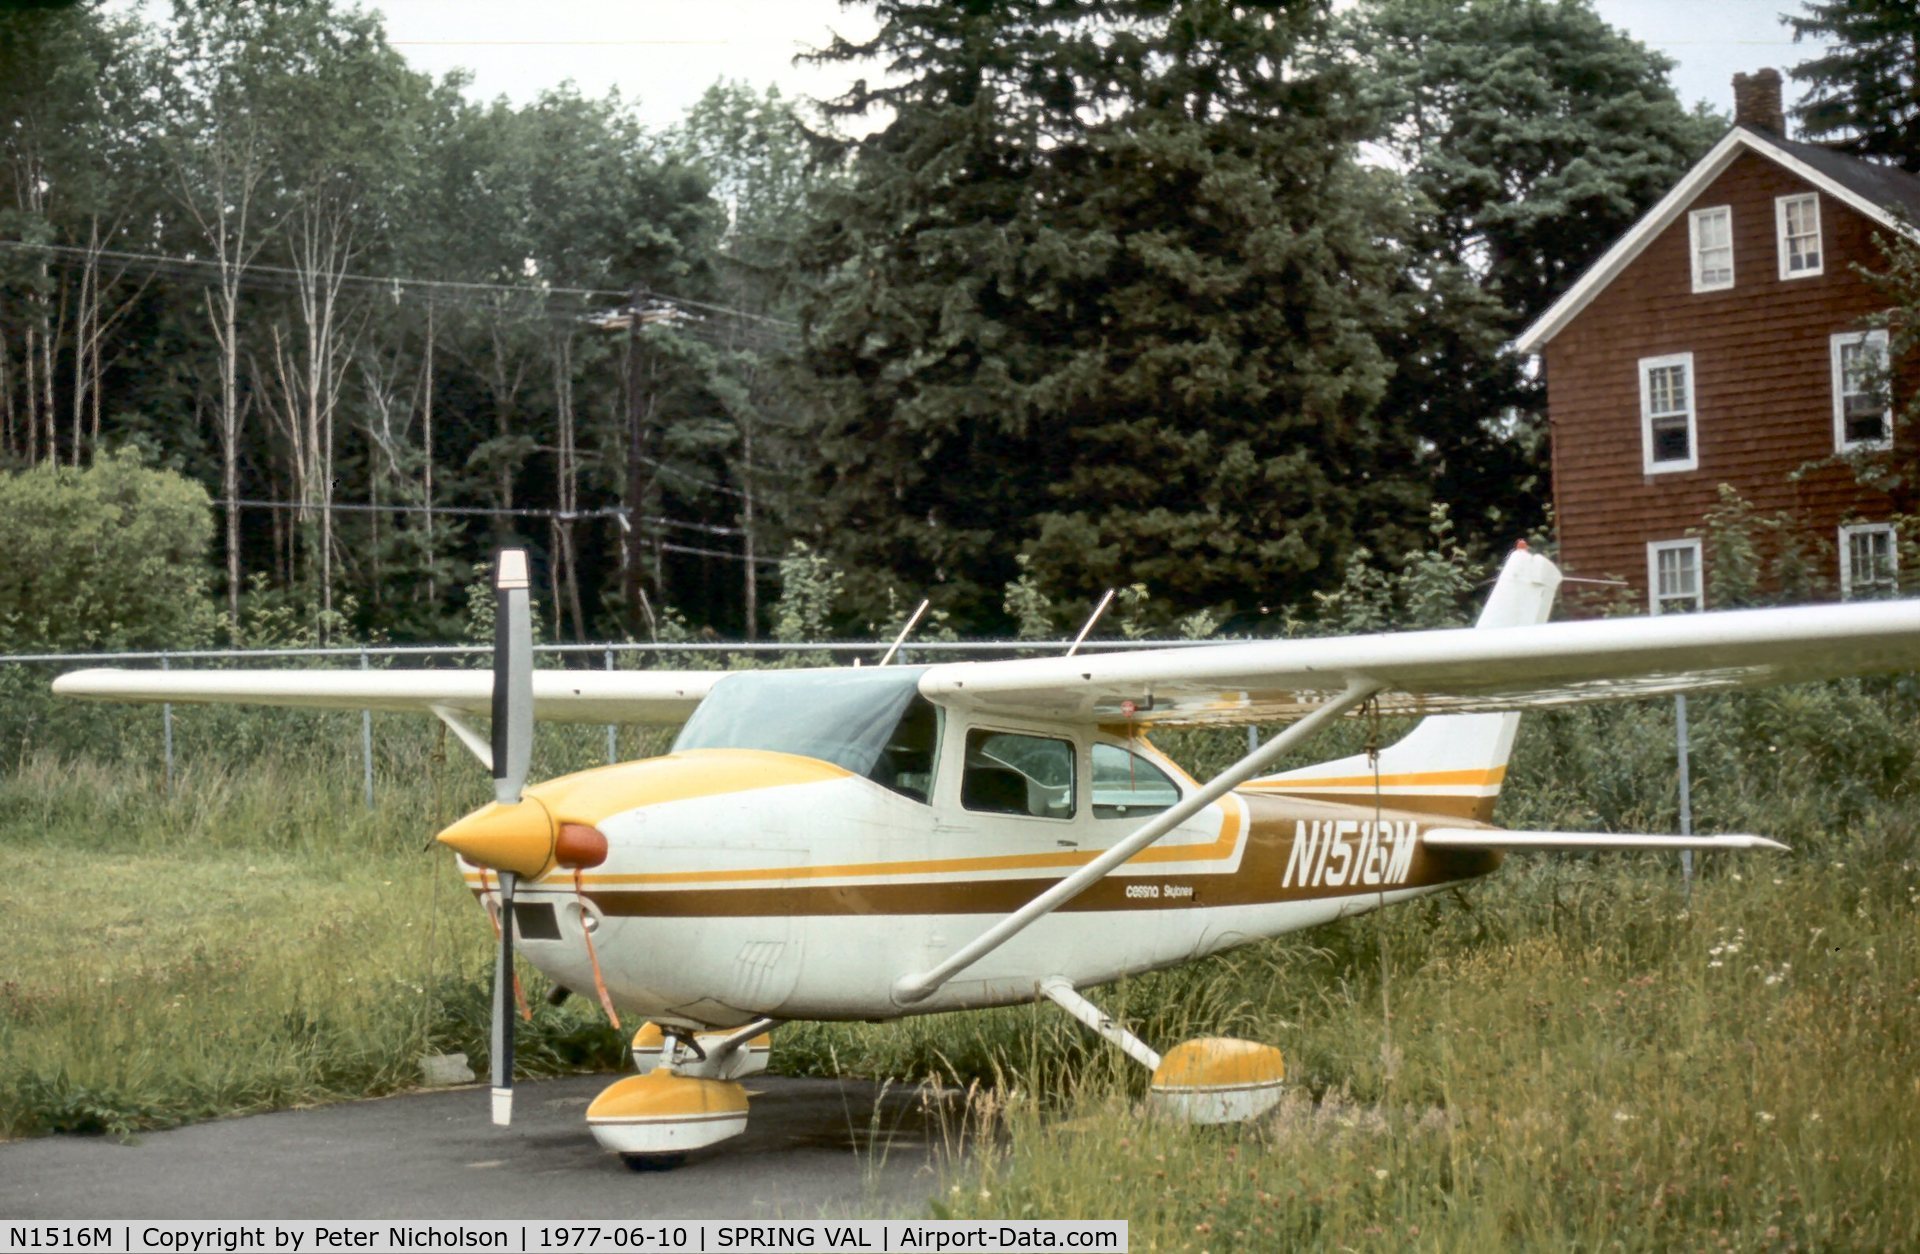 N1516M, Cessna 182P Skylane C/N 18264360, This Cessna 182P Skylane was seen at Spring Valley Airport, New York State in the Summer of 1977 - the airport closed in 1985.